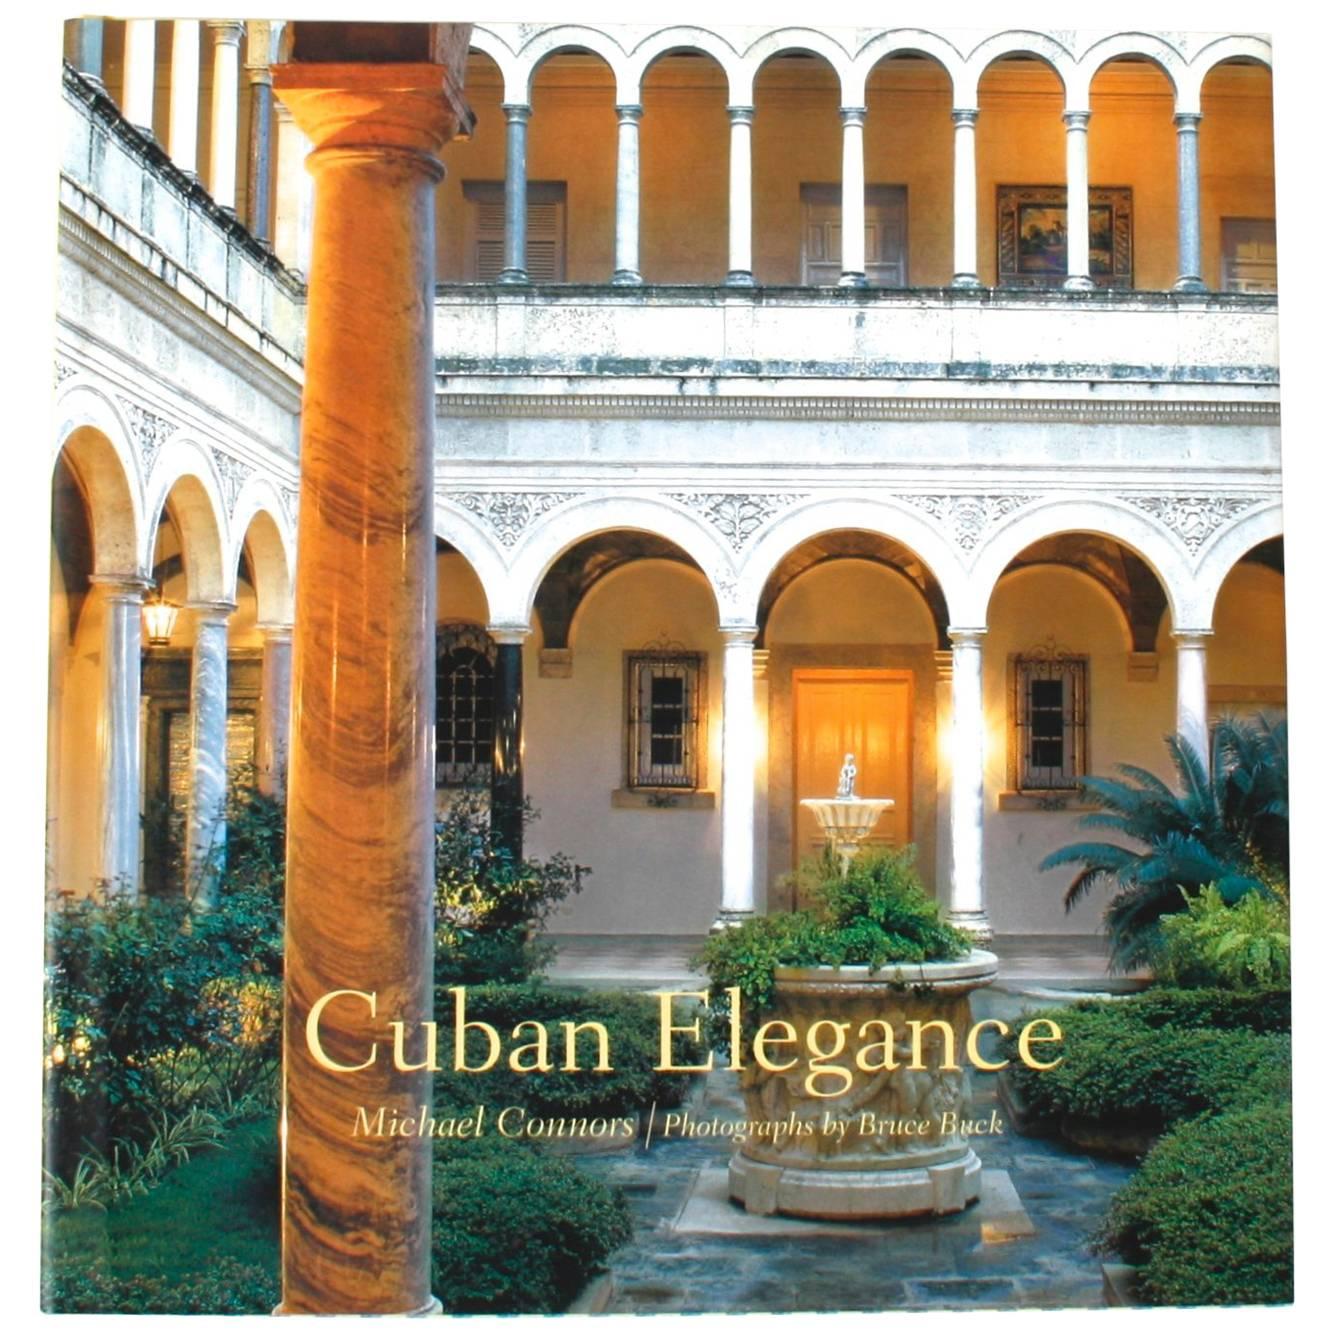 "Cuban Elegance" Book by Michael Connors, First Edition